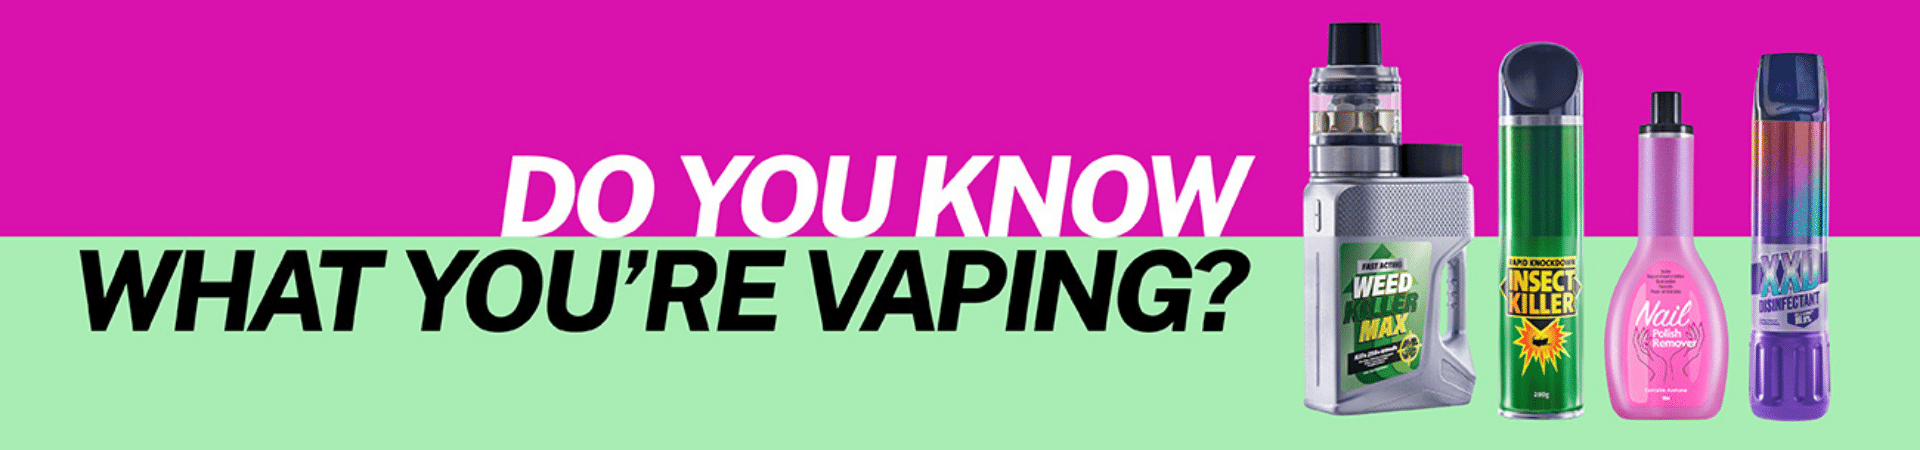 Image of vapes and do you know what you are vaping